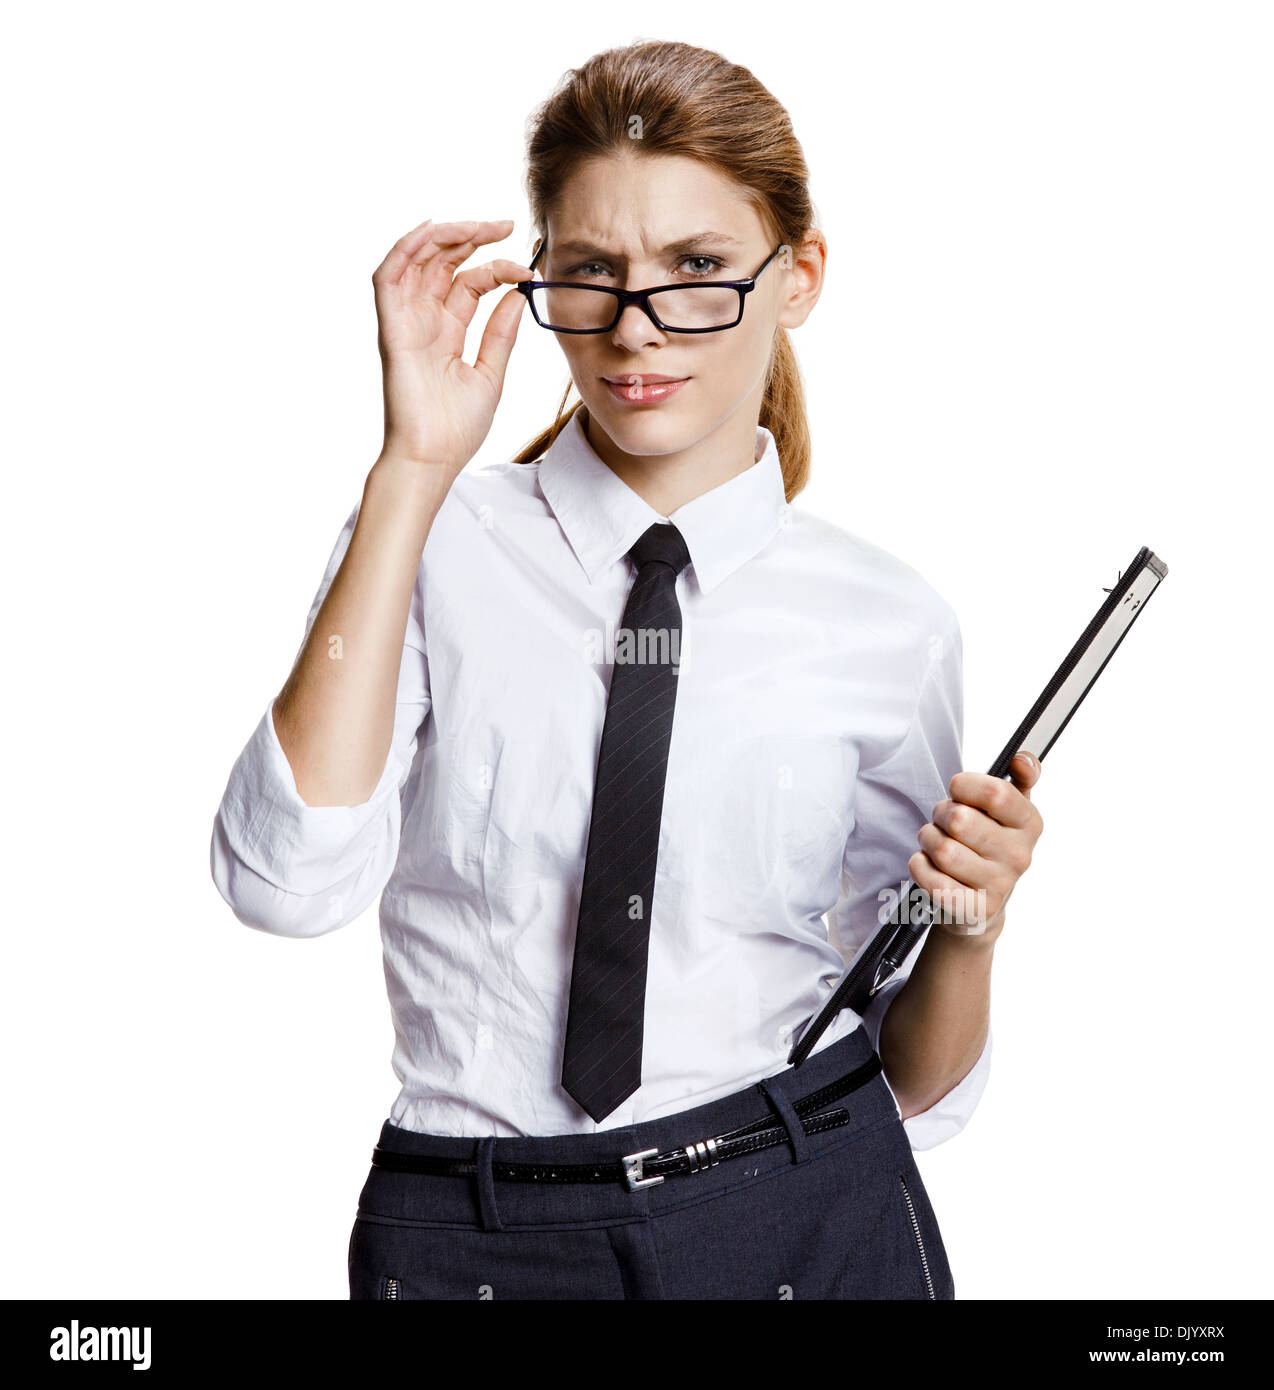 Surprised woman looking over glasses Stock Photo